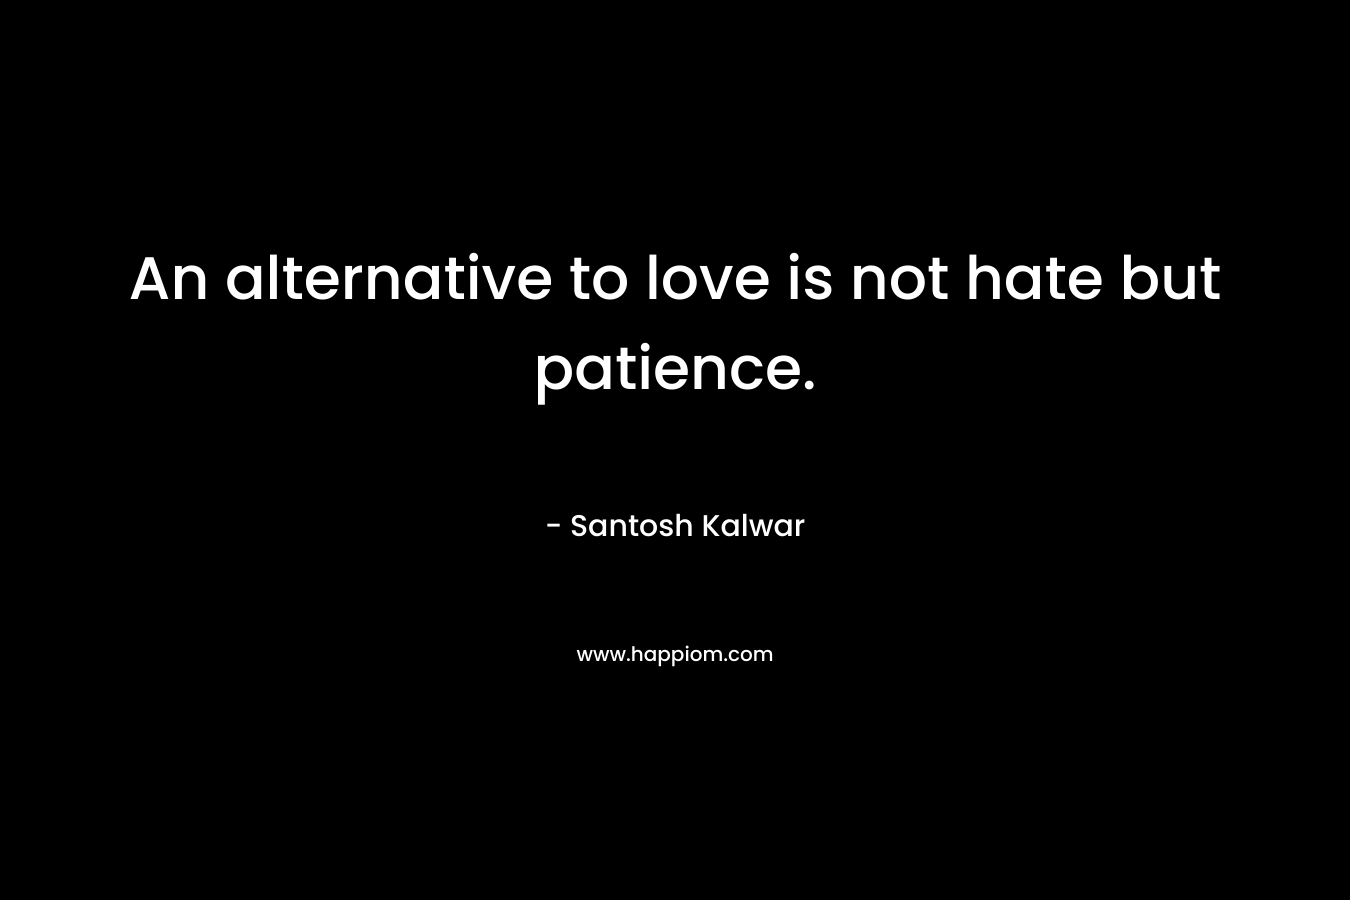 An alternative to love is not hate but patience.